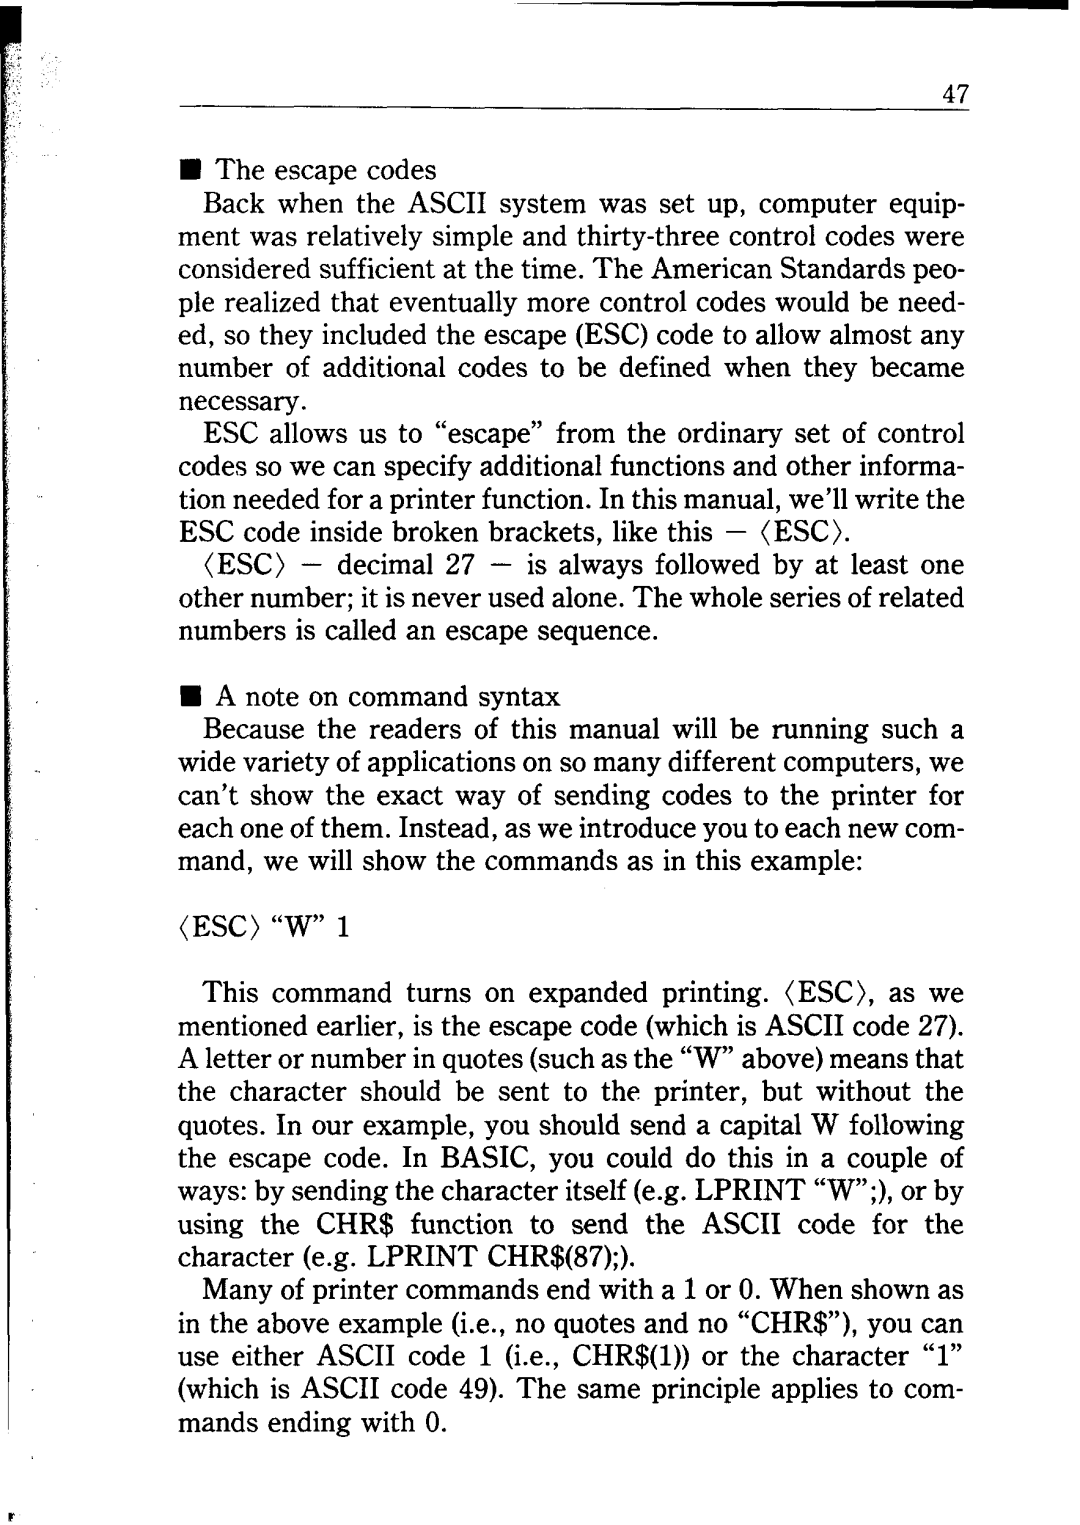 Star Micronics NB24-10/15 user manual B The escape codes, n A note on command syntax, Esc “W” 